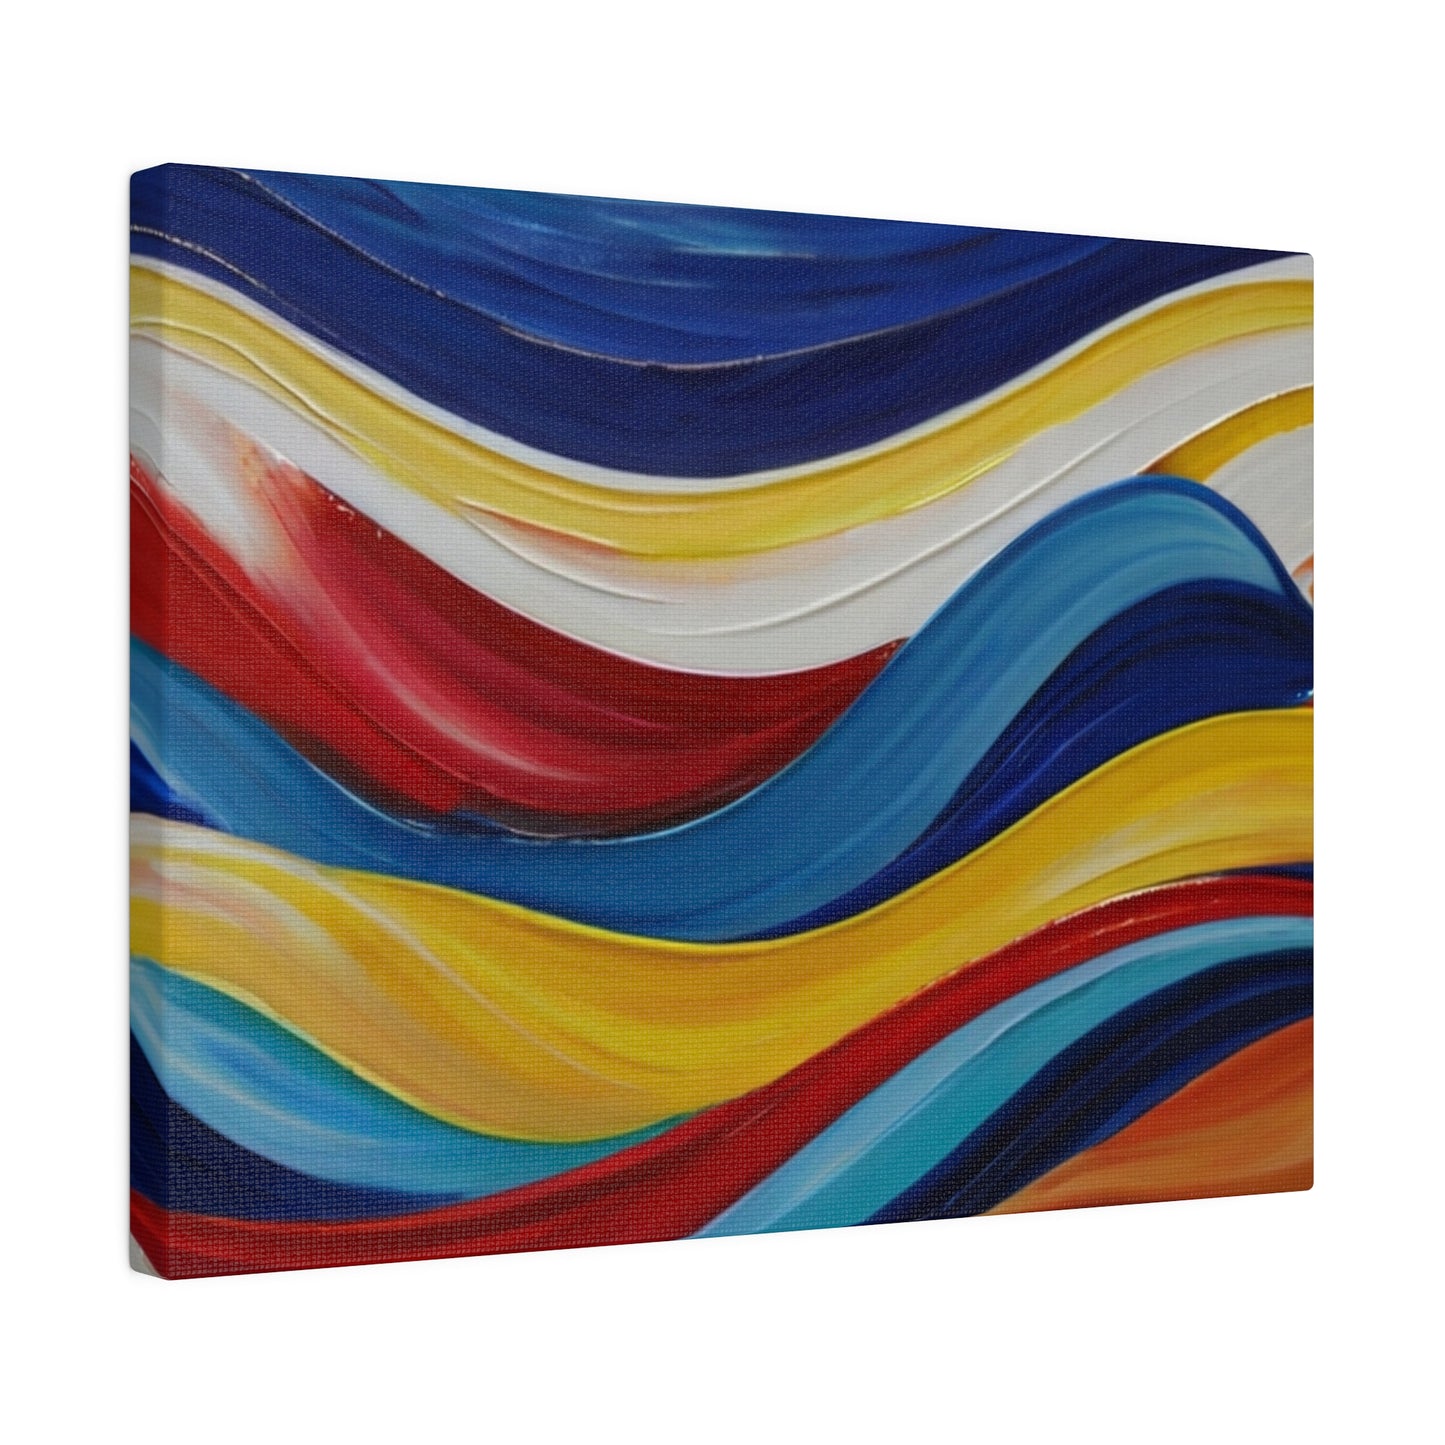 Colourful Waves At Sea - Matte Canvas, Stretched, 0.75"